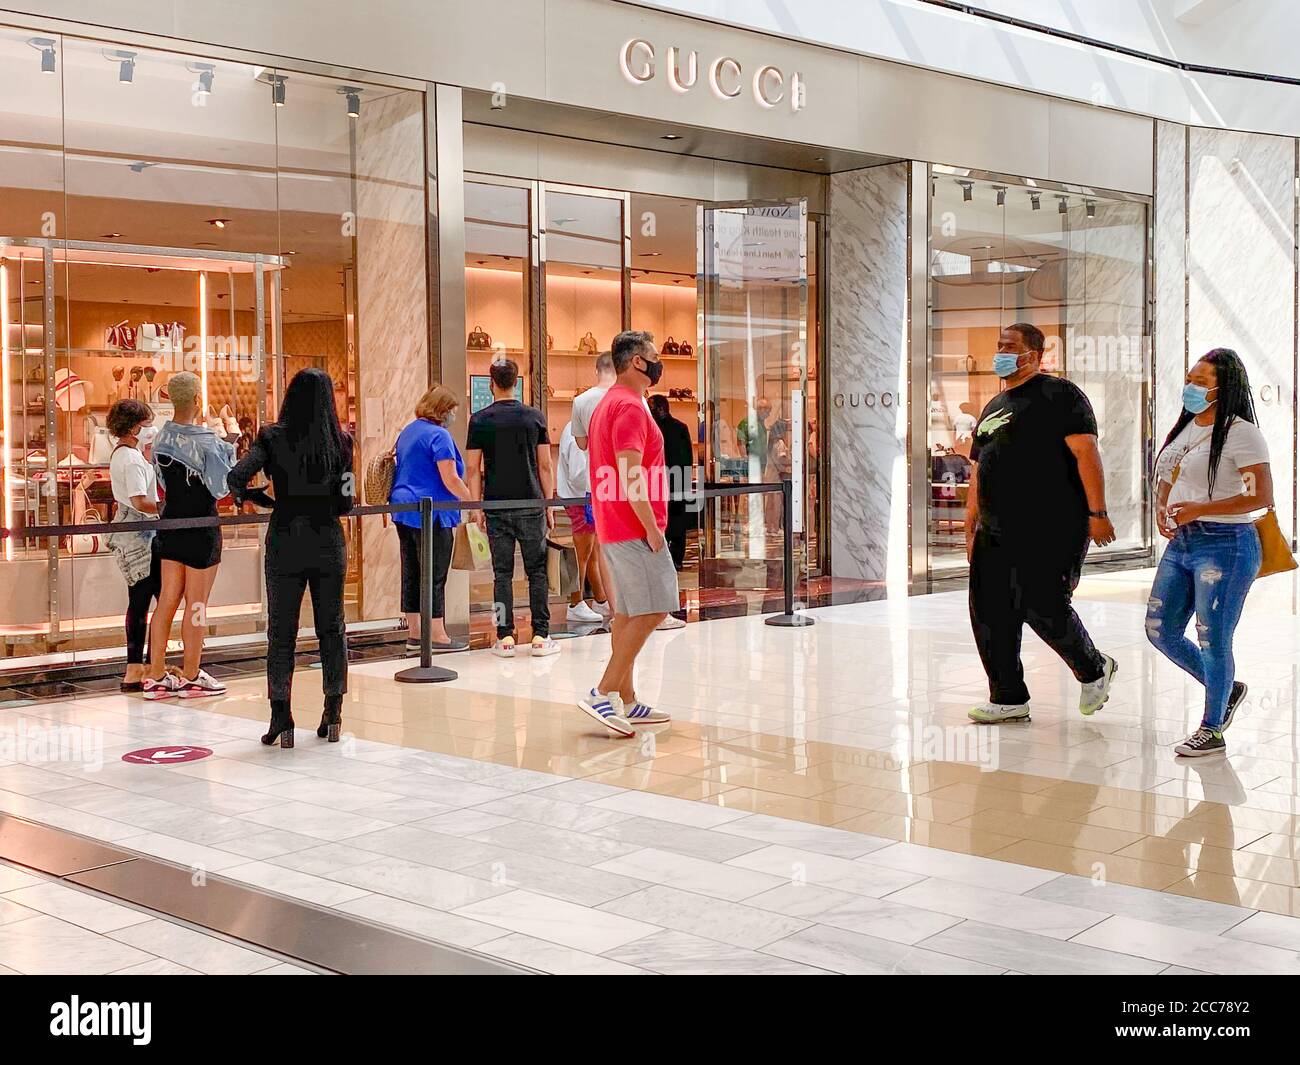 Shoppers in masks wait in line at the Gucci store in the King of Prussia  Mall located near Philadelphia, PA - Social distancing shopping Stock Photo  - Alamy